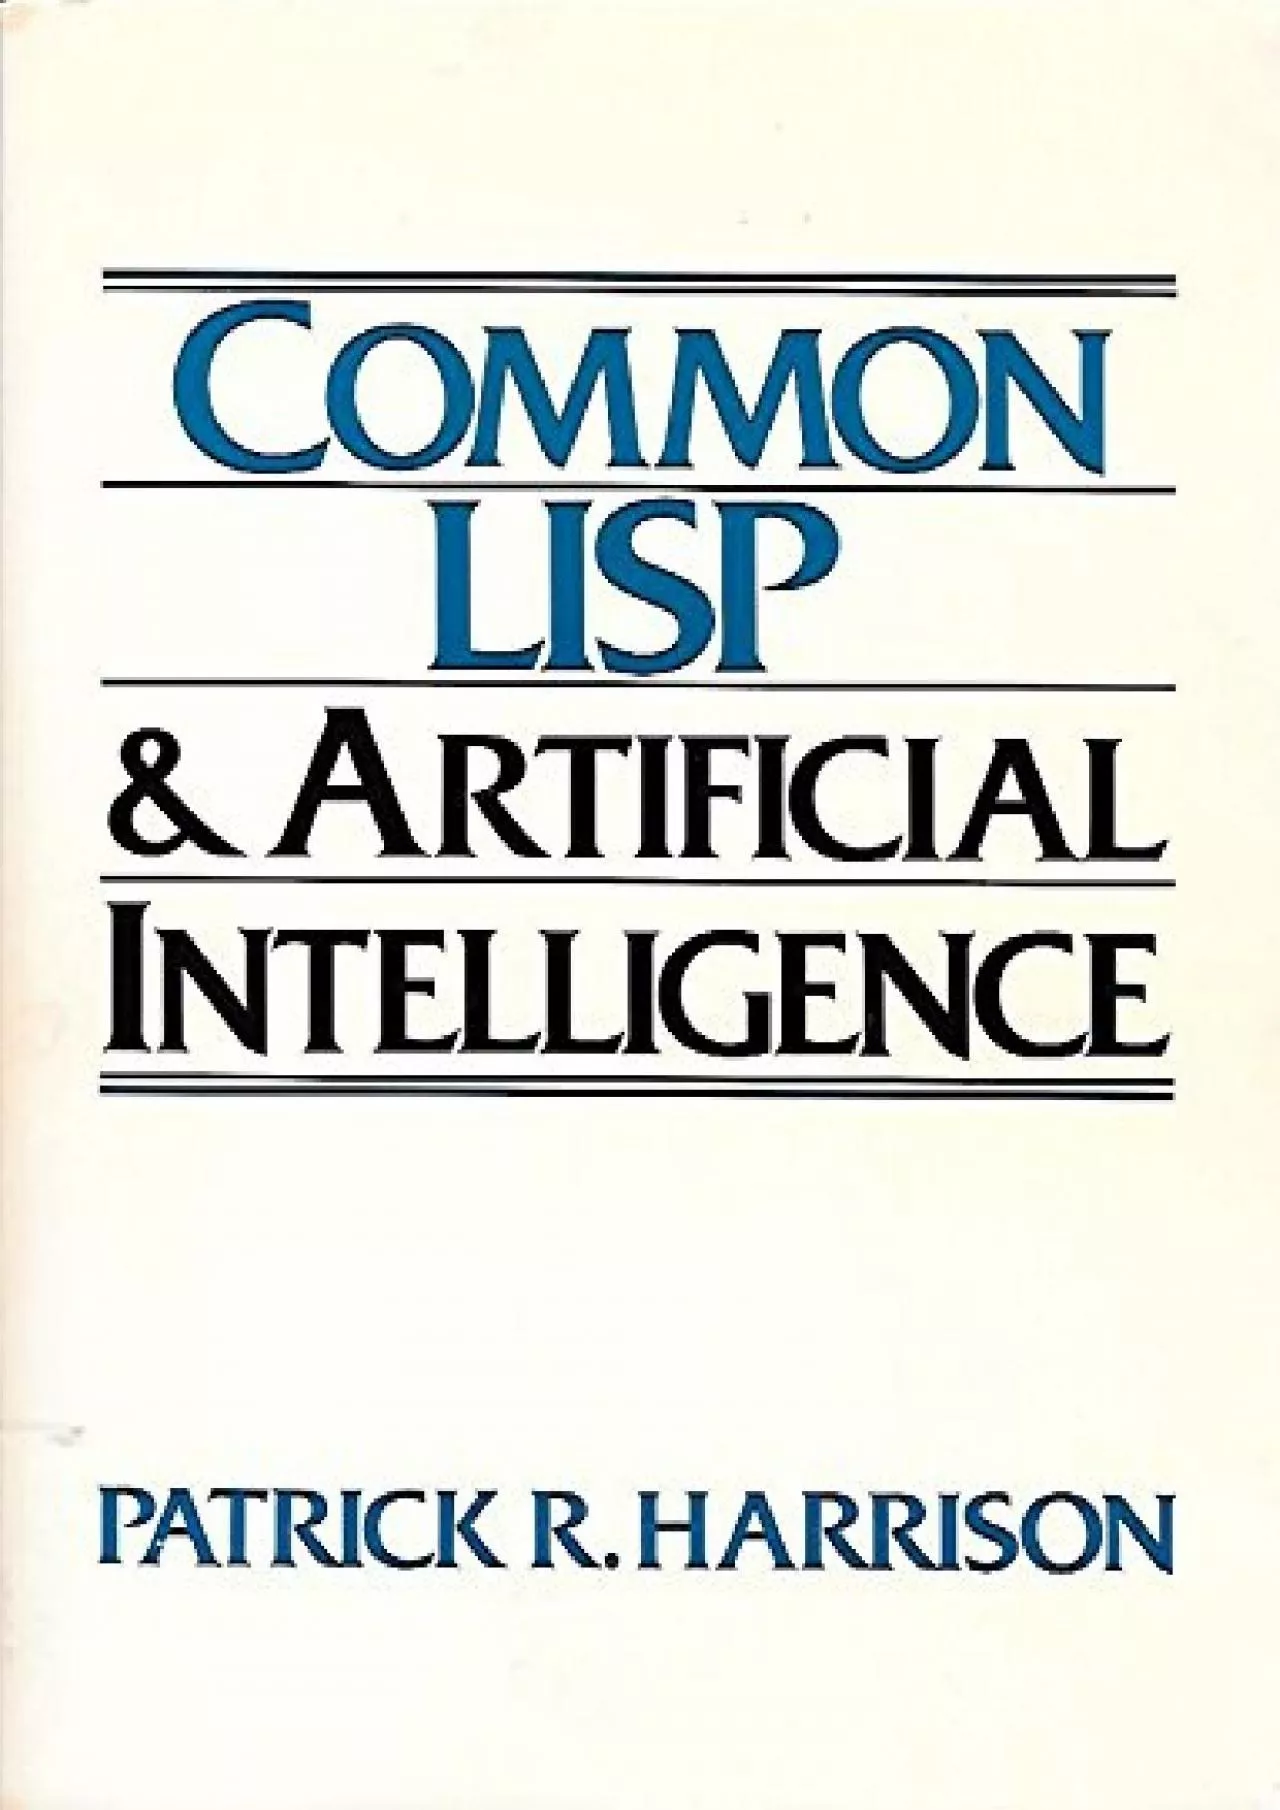 [BEST]-Common Lisp and Artificial Intelligence